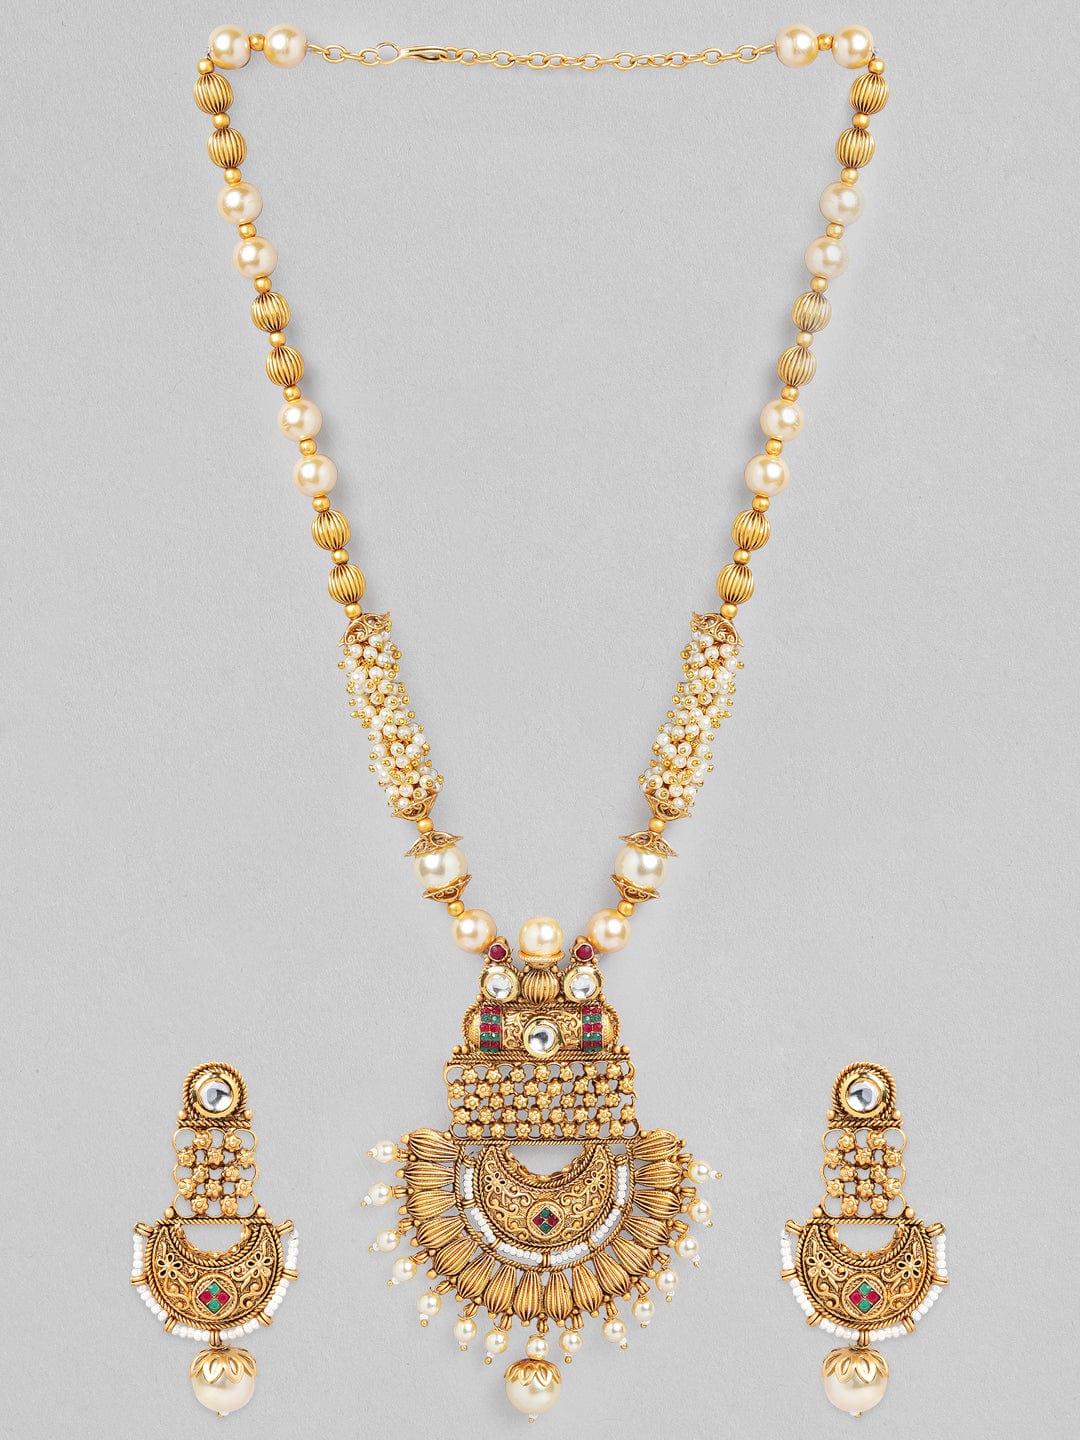 Lord Balaji Design Gold Plated Pendant with Black Thread Necklace Set –  www.soosi.co.in